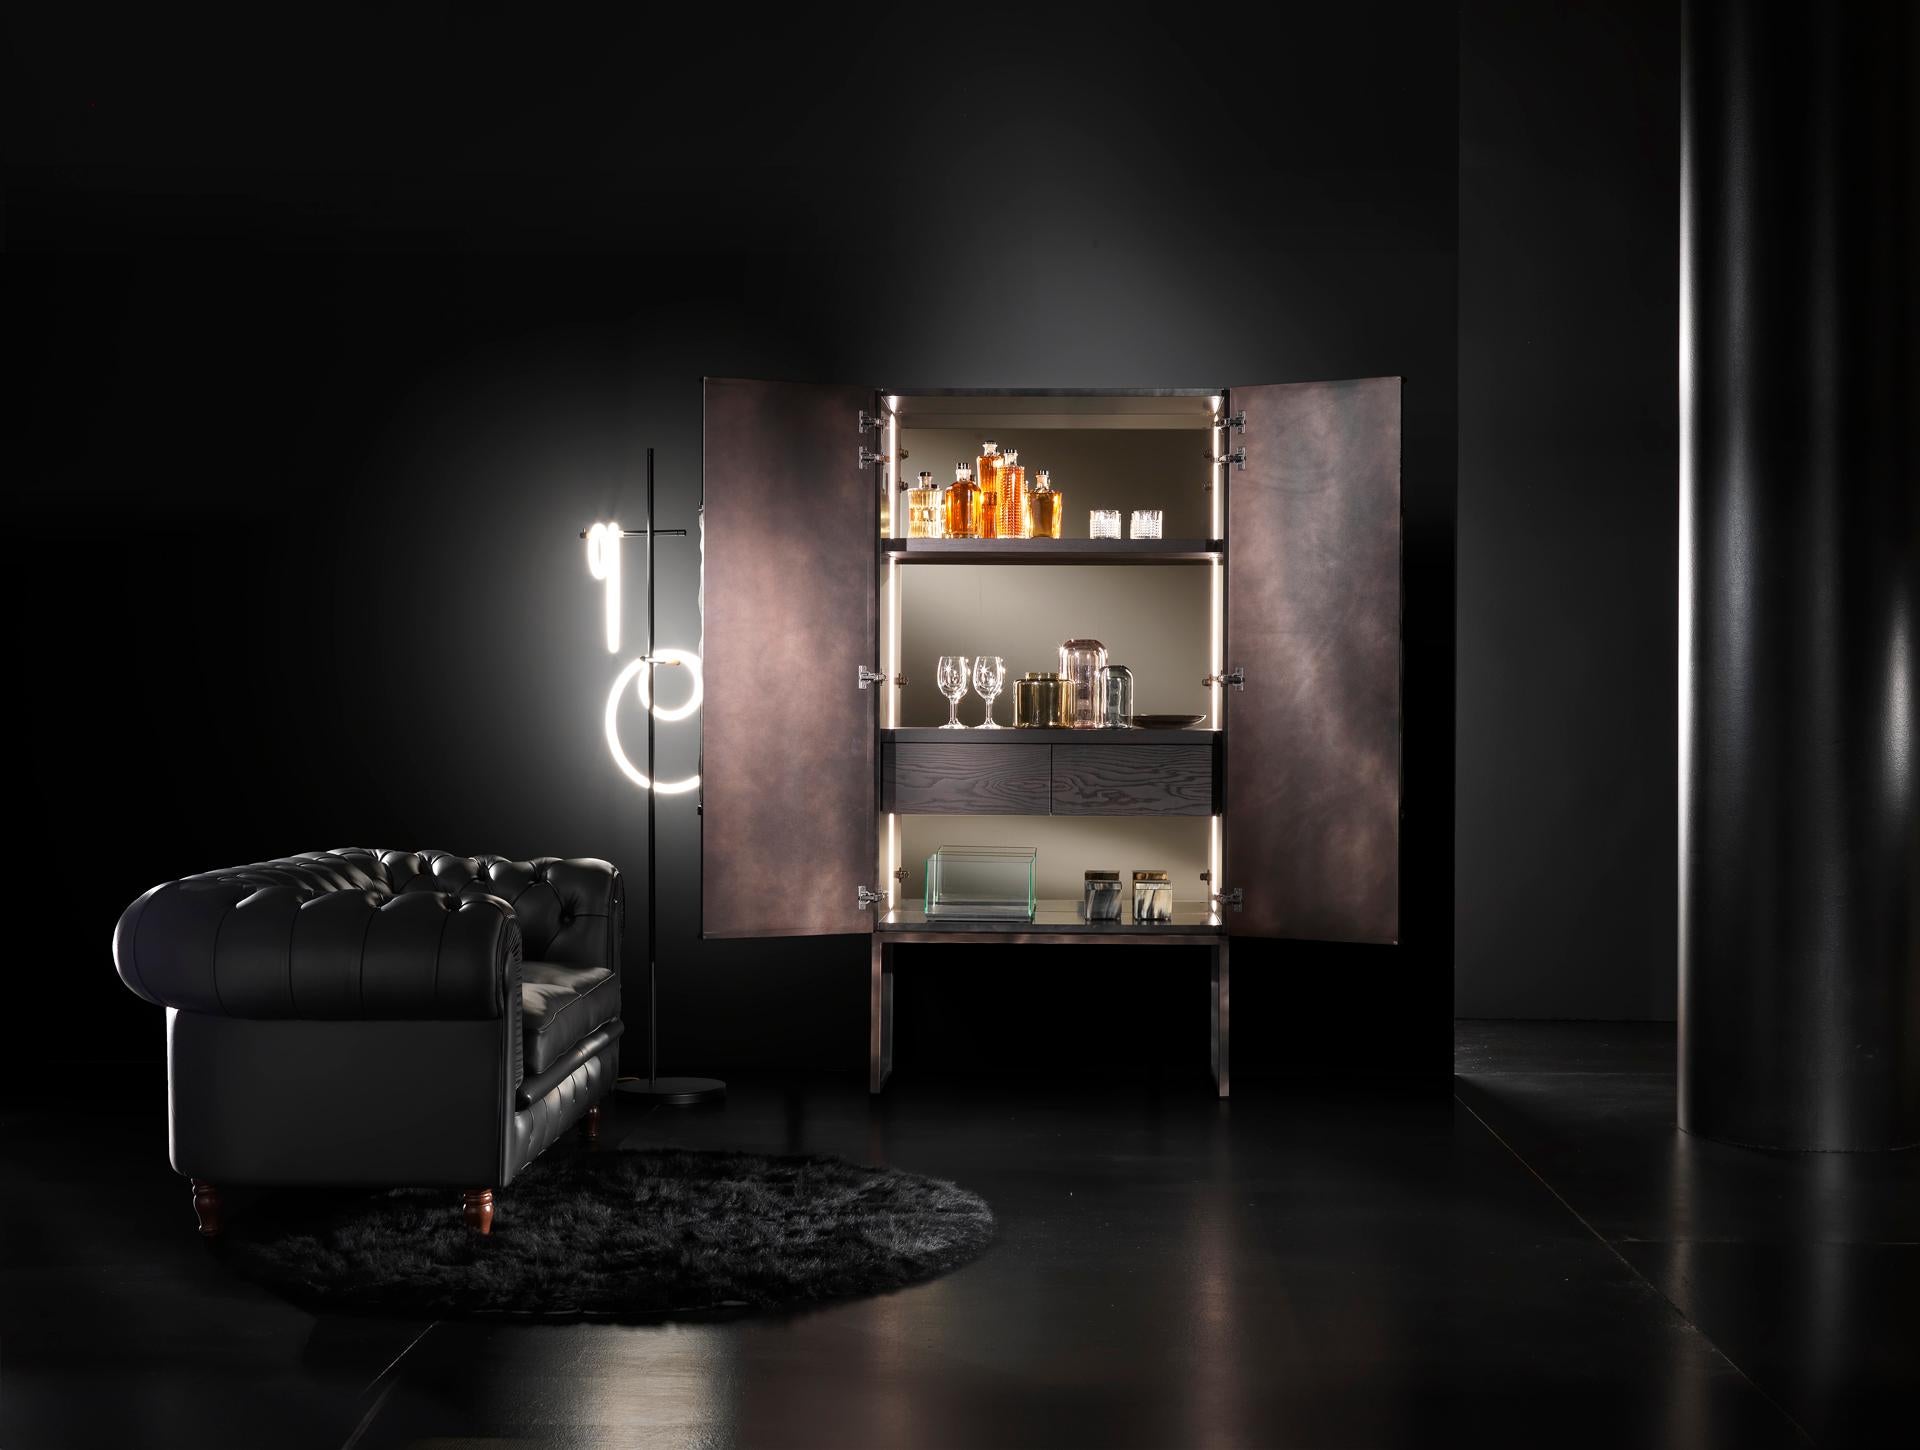 Mobile Con Tondo Credenza by Francesco Profili
Dimensions: W 100 x D 50 x H 200 cm 
Materials: Plywood, MDF, Ash Veneer, Bronzed Mirror, Wood, Wooden Ornamen.

The heart of this sideboard is its decorative element placed at the center, a round